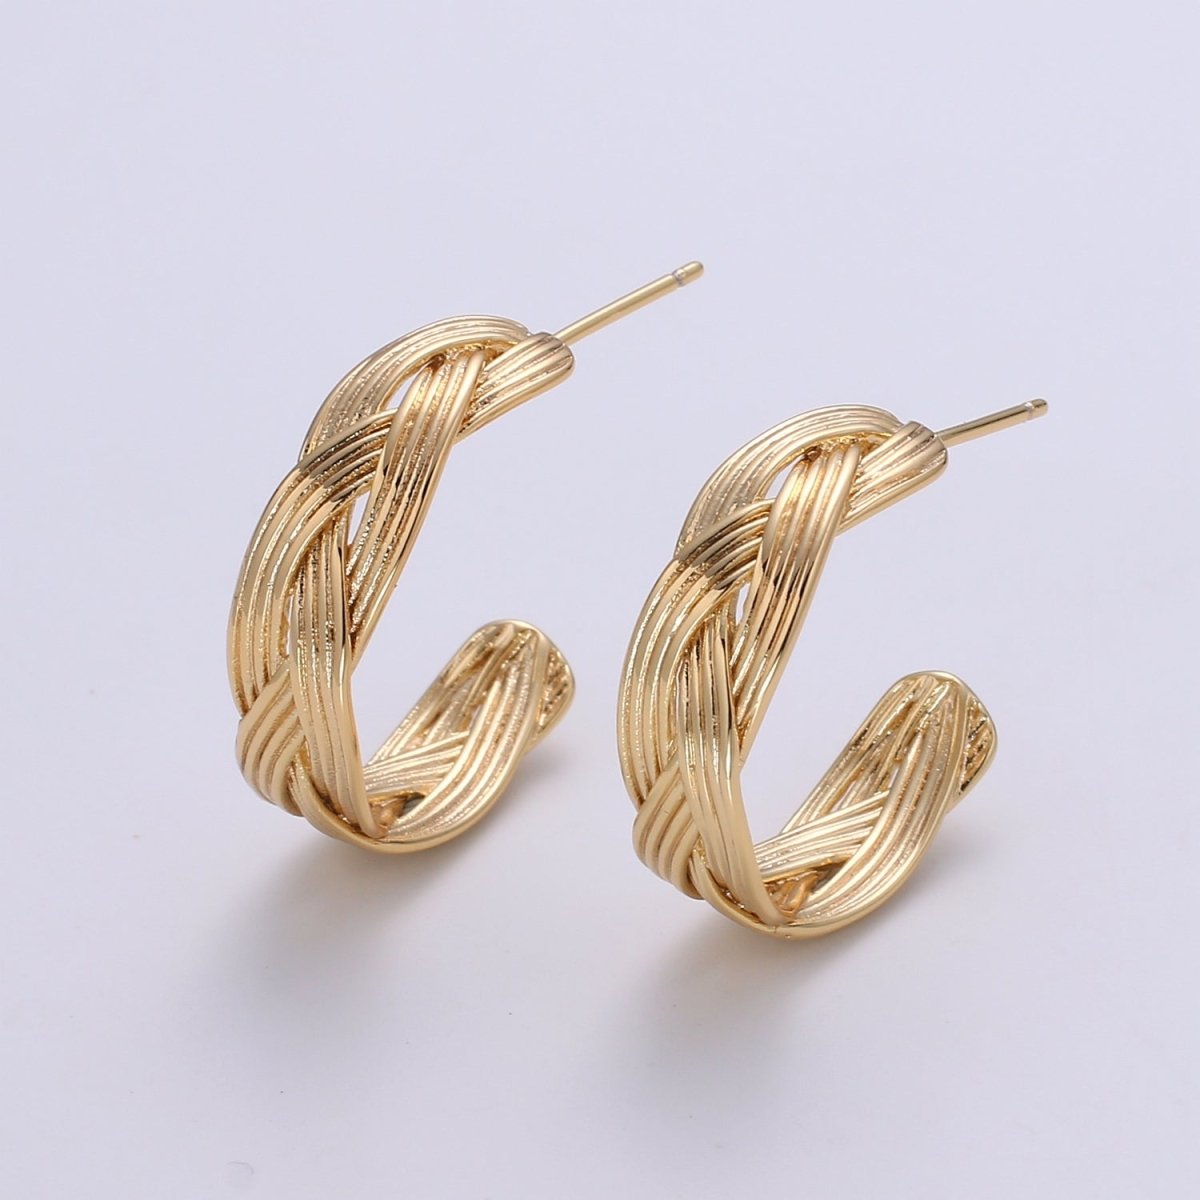 Golden Woven Spiral Studs Earring Gold Plated Layered Geometric Shape Earring Jewelry GP-899 - DLUXCA